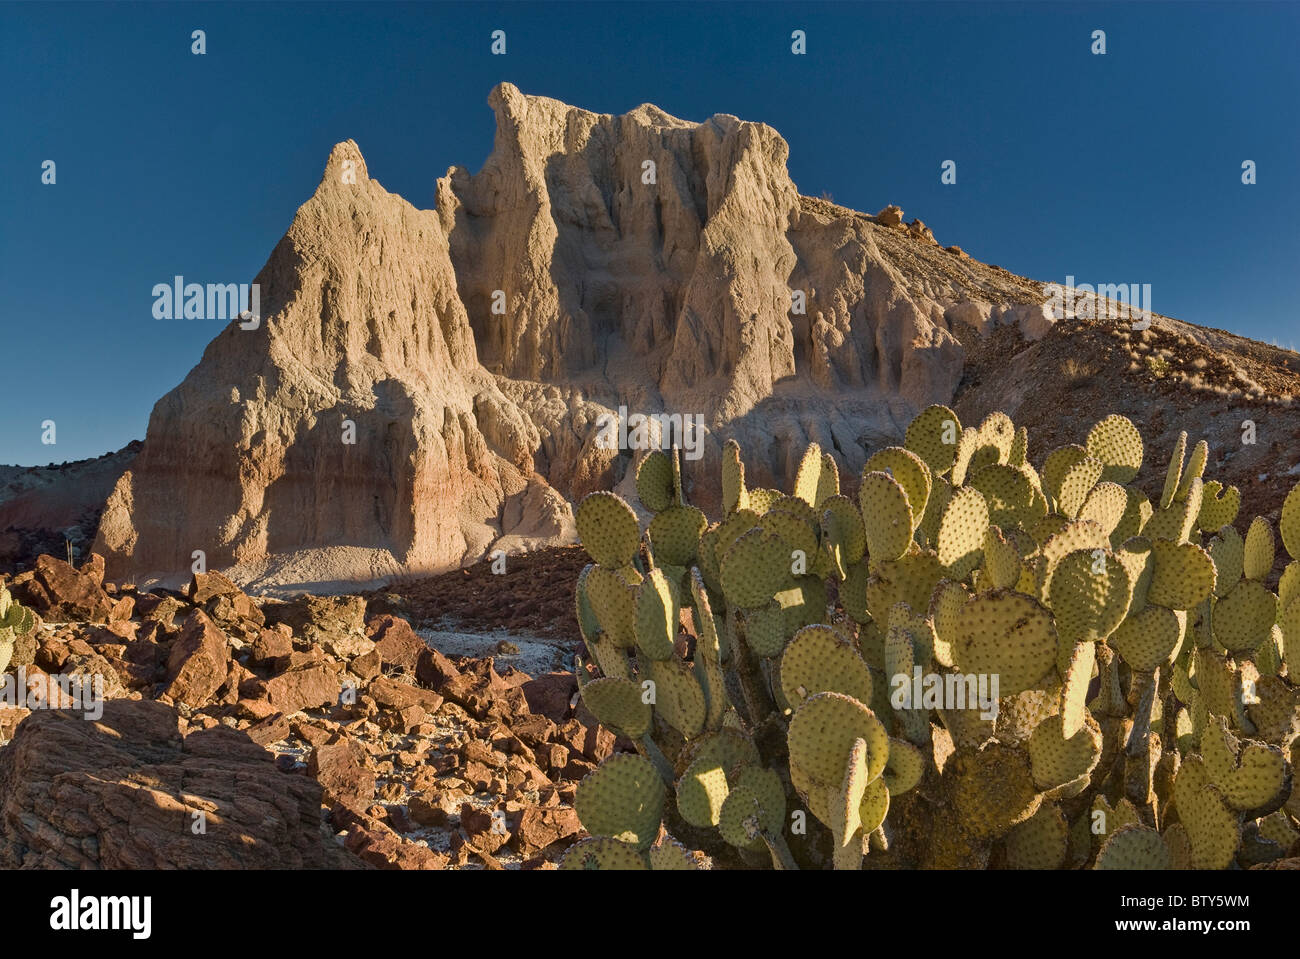 Prickly pear cactus at lava rocks and tuff ash volcanic formations in Cerro Castellan area, Big Bend National Park, Texas, USA Stock Photo